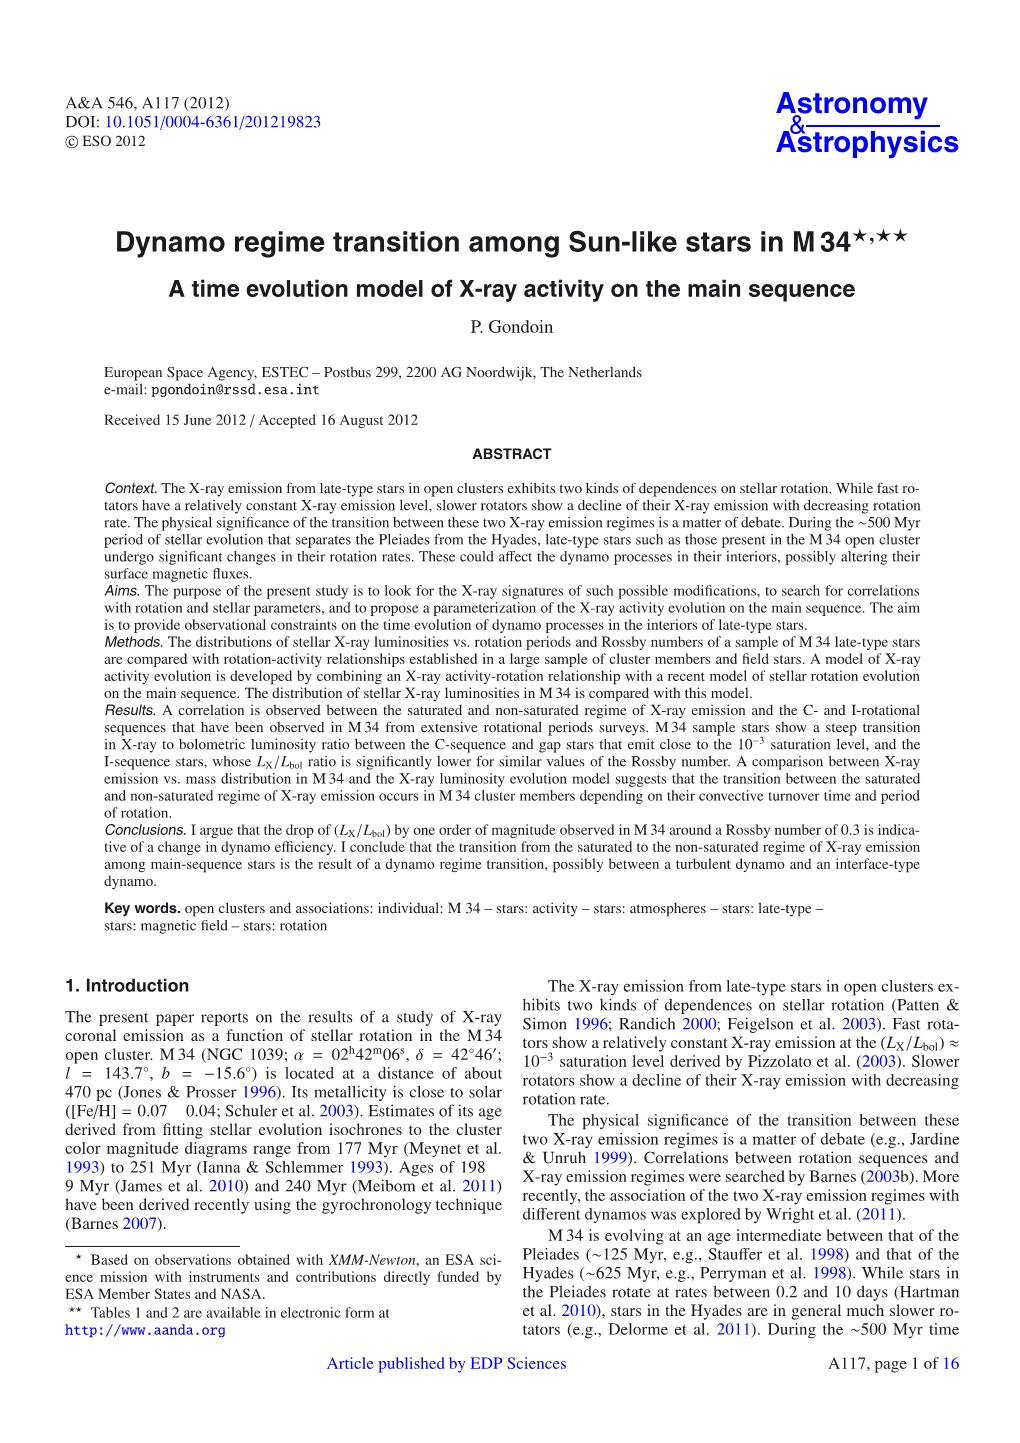 Dynamo Regime Transition Among Sun-Like Stars in M 34�,�� a Time Evolution Model of X-Ray Activity on the Main Sequence P